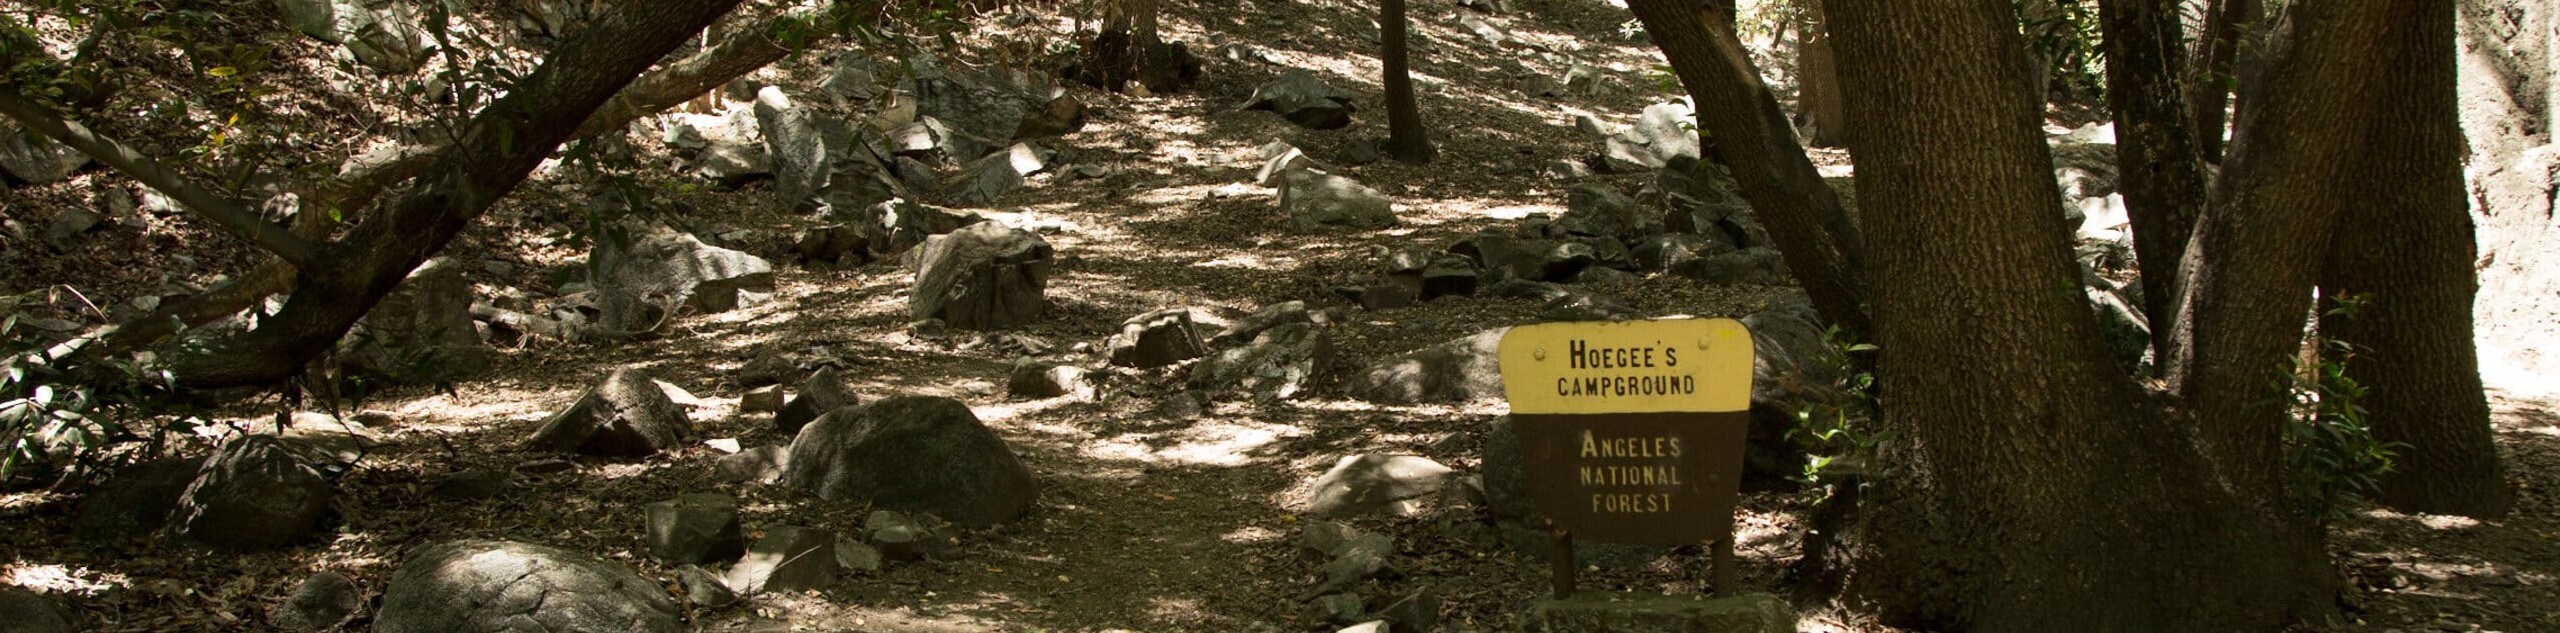 Chantry Flats to Hoegee’s Camp Hike